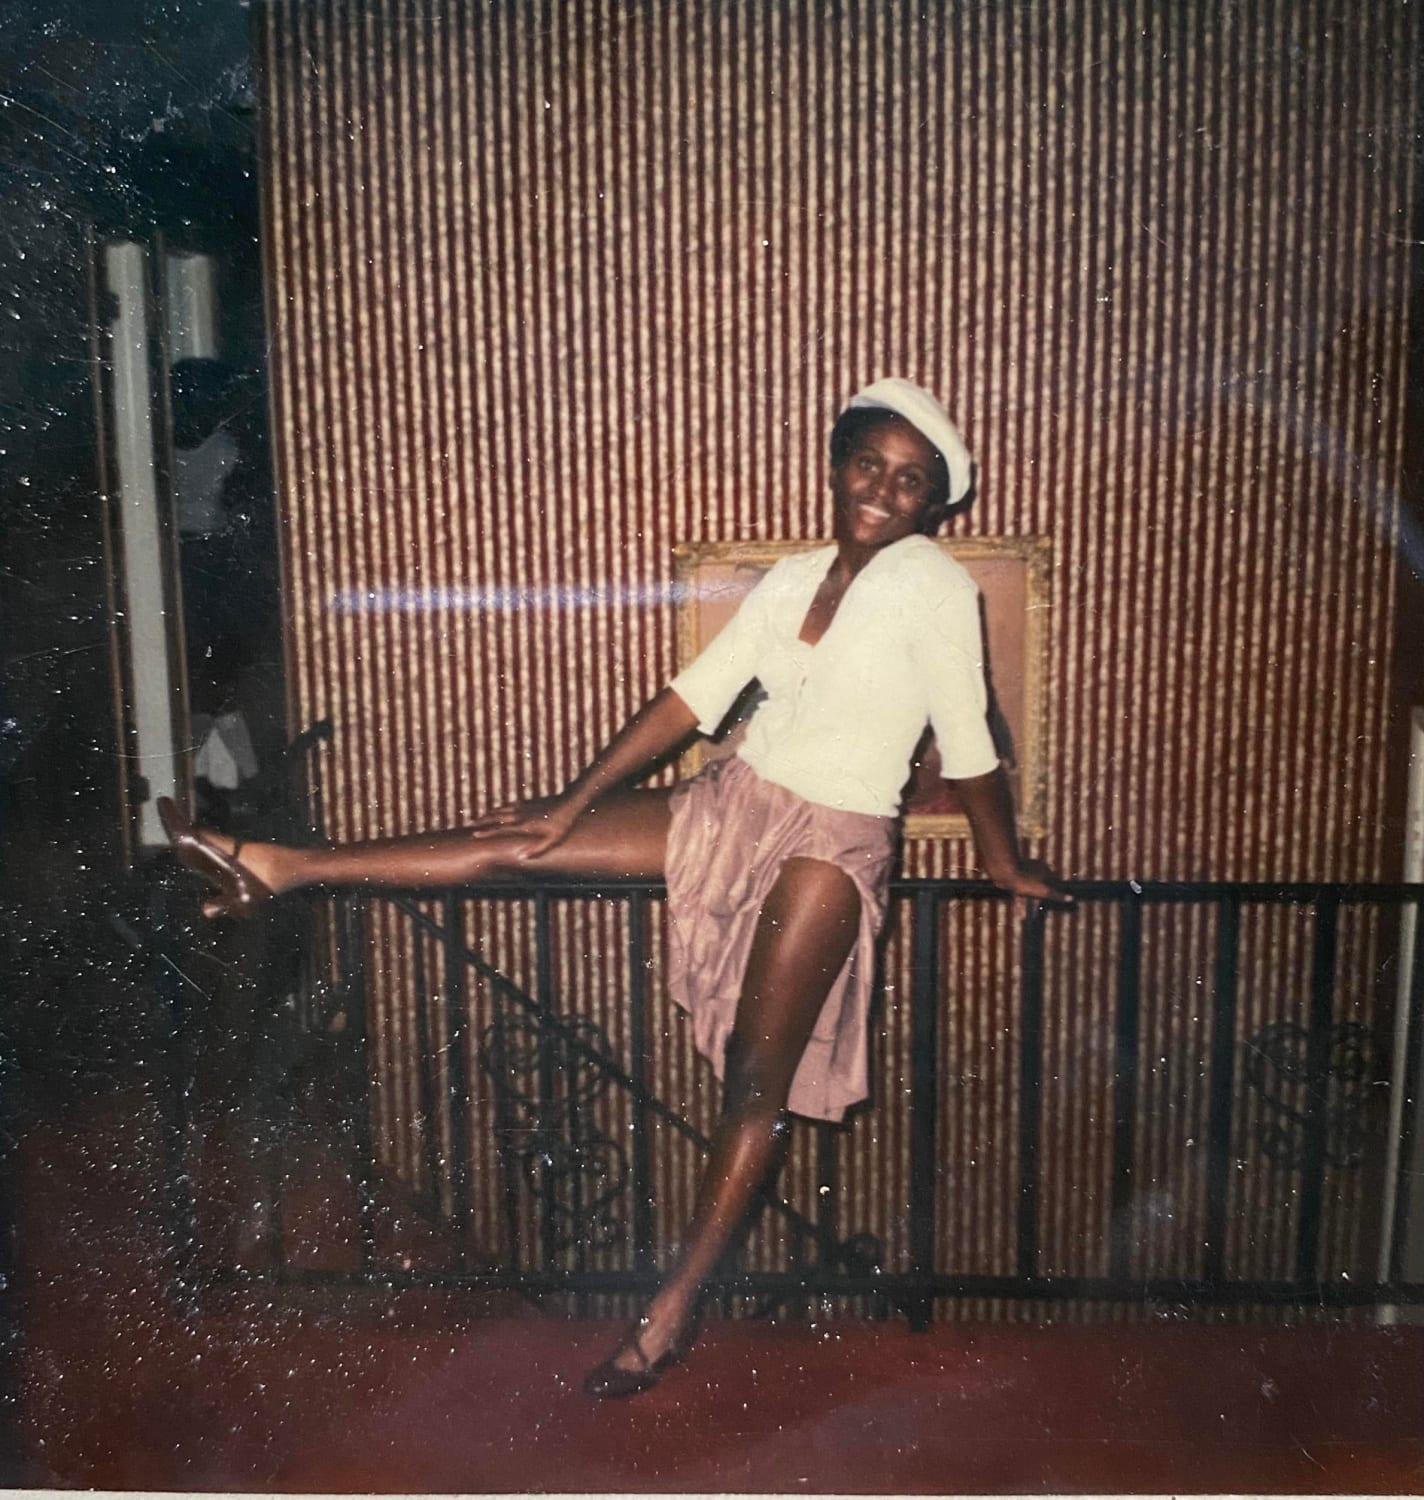 My mother and her disco dancer legs, NJ 1980s